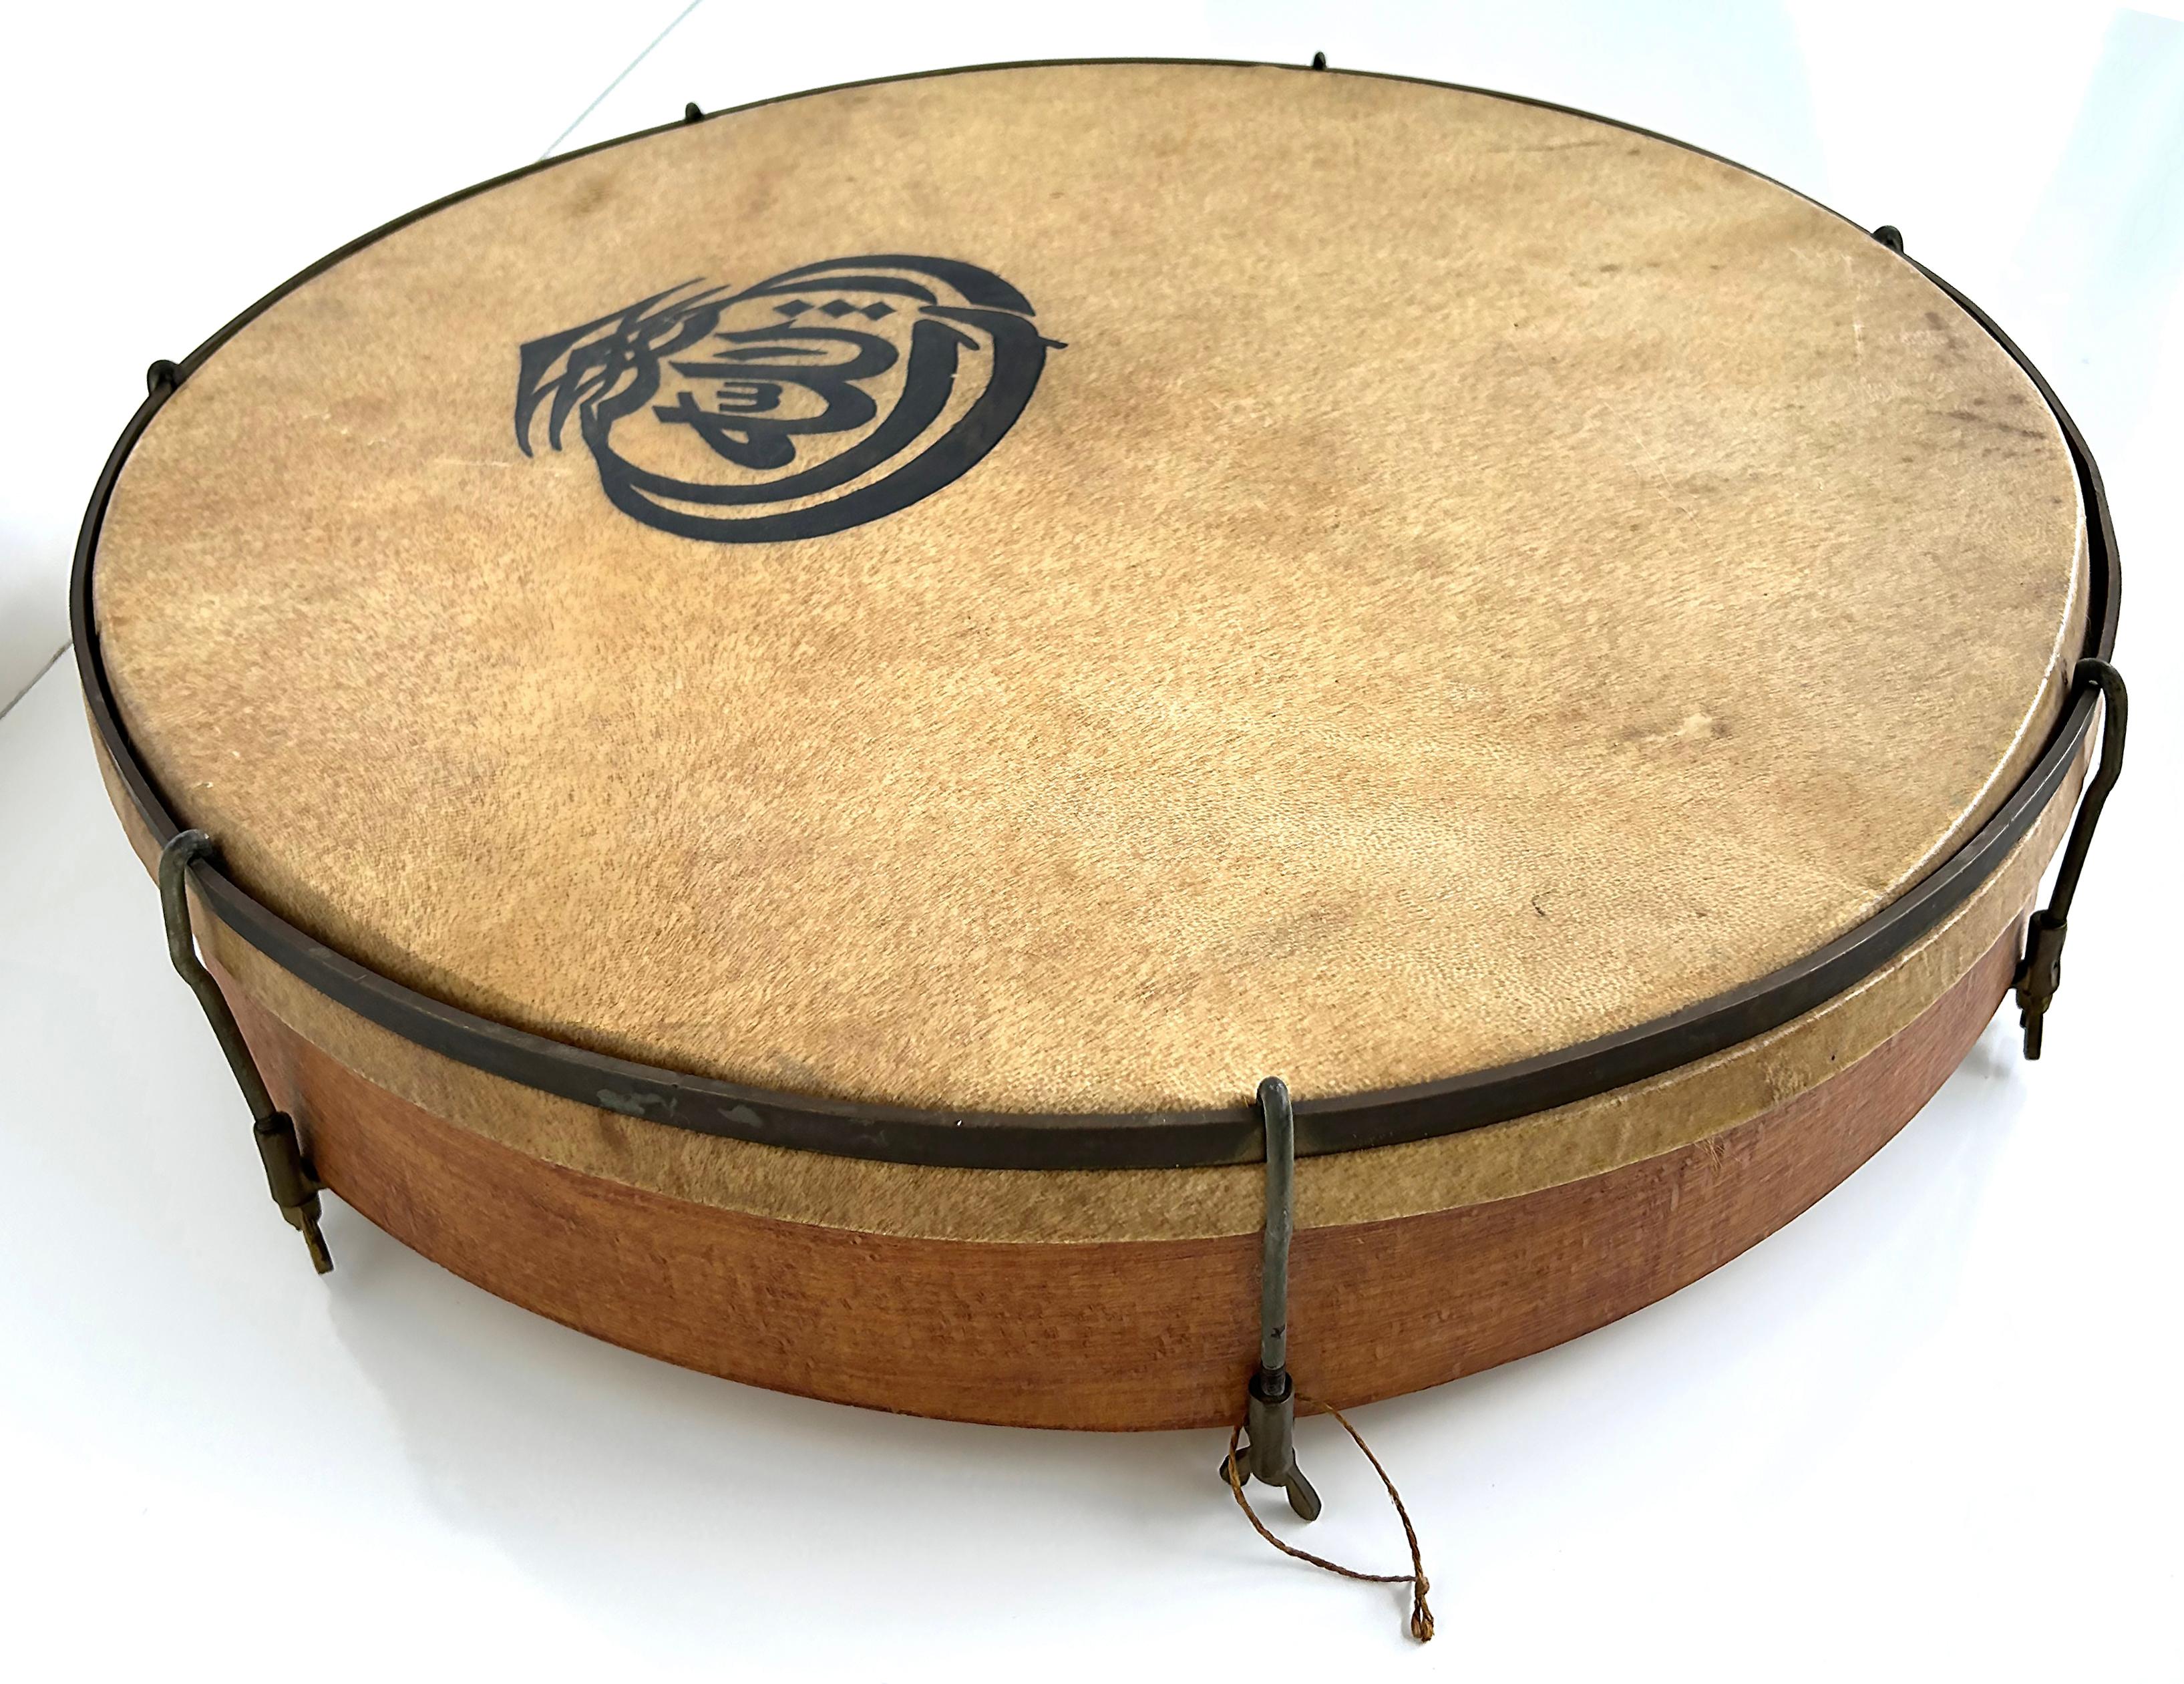 20th Century Hand-Made High-Quality Animal Skin Bentwood Drum with Ink Graphic Decoration For Sale